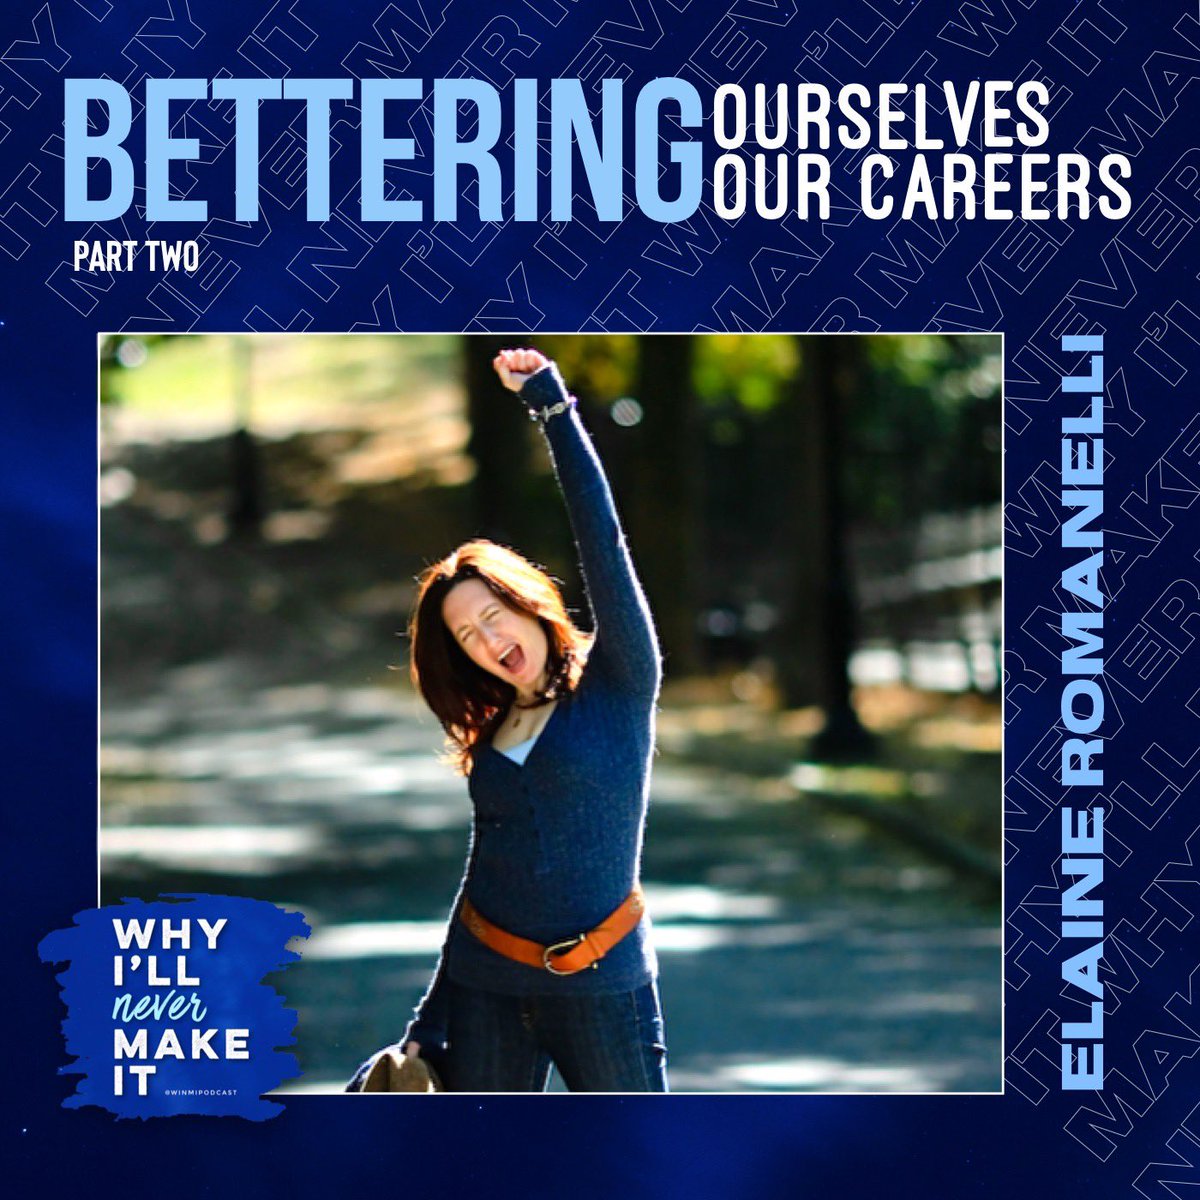 Check out my discussion with Elaine Romanelli about handling self-doubts and criticism as a performer #actorslife #theaterpodcast

whyillnevermakeit.com/e/elaine-roman…